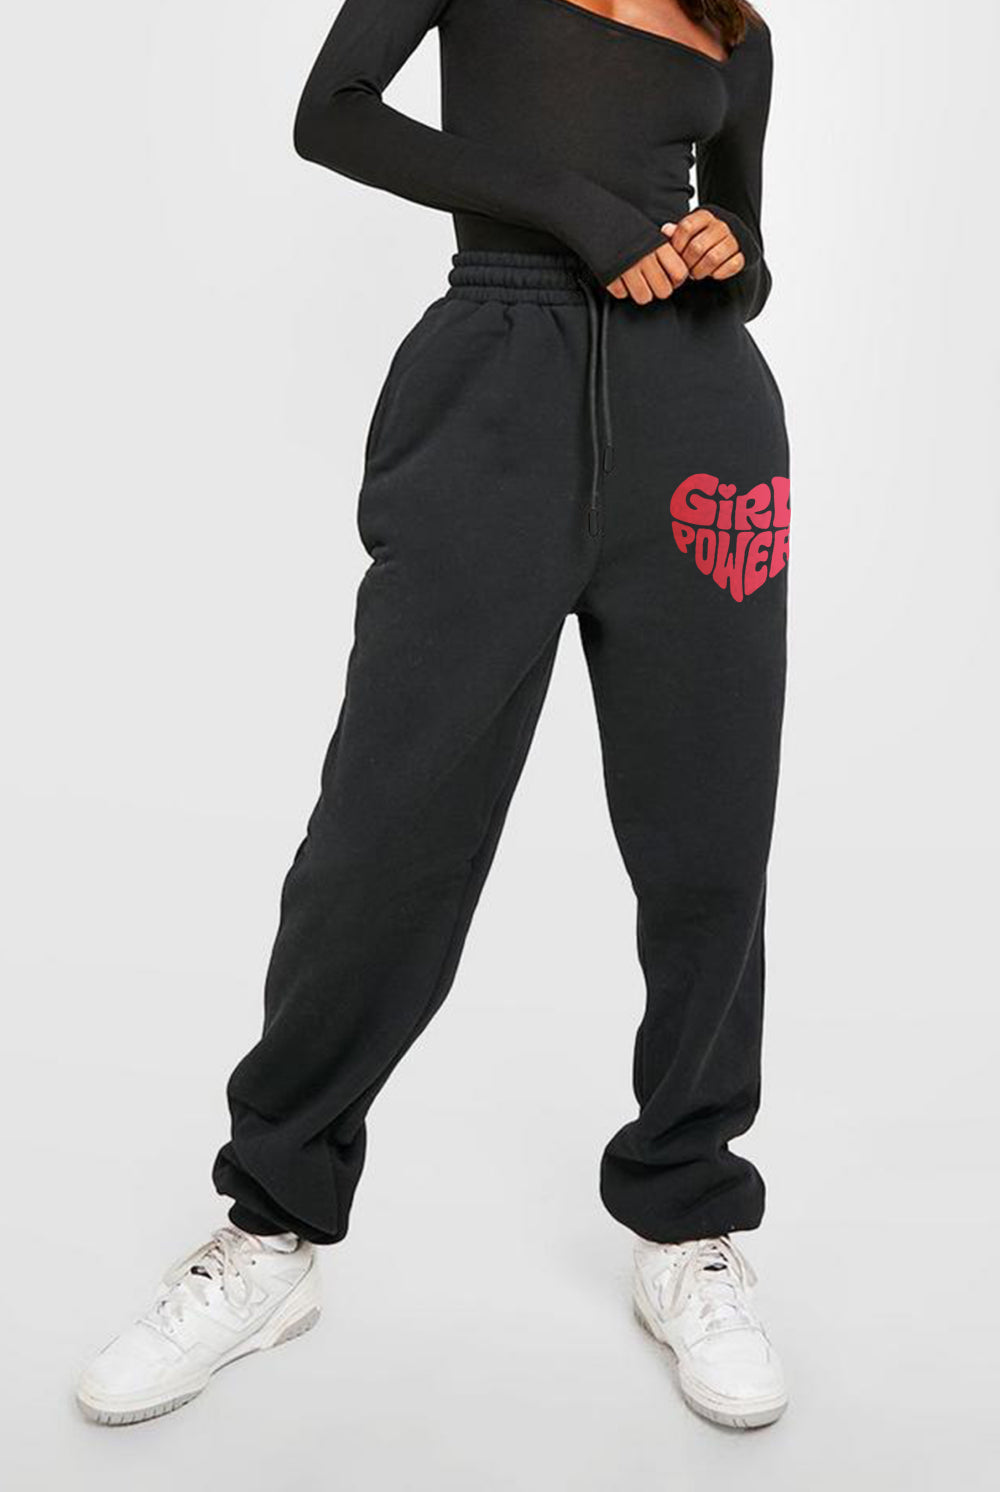 Lavender Simply Love Full Size GIRL POWER Graphic Sweatpants Sweatpants